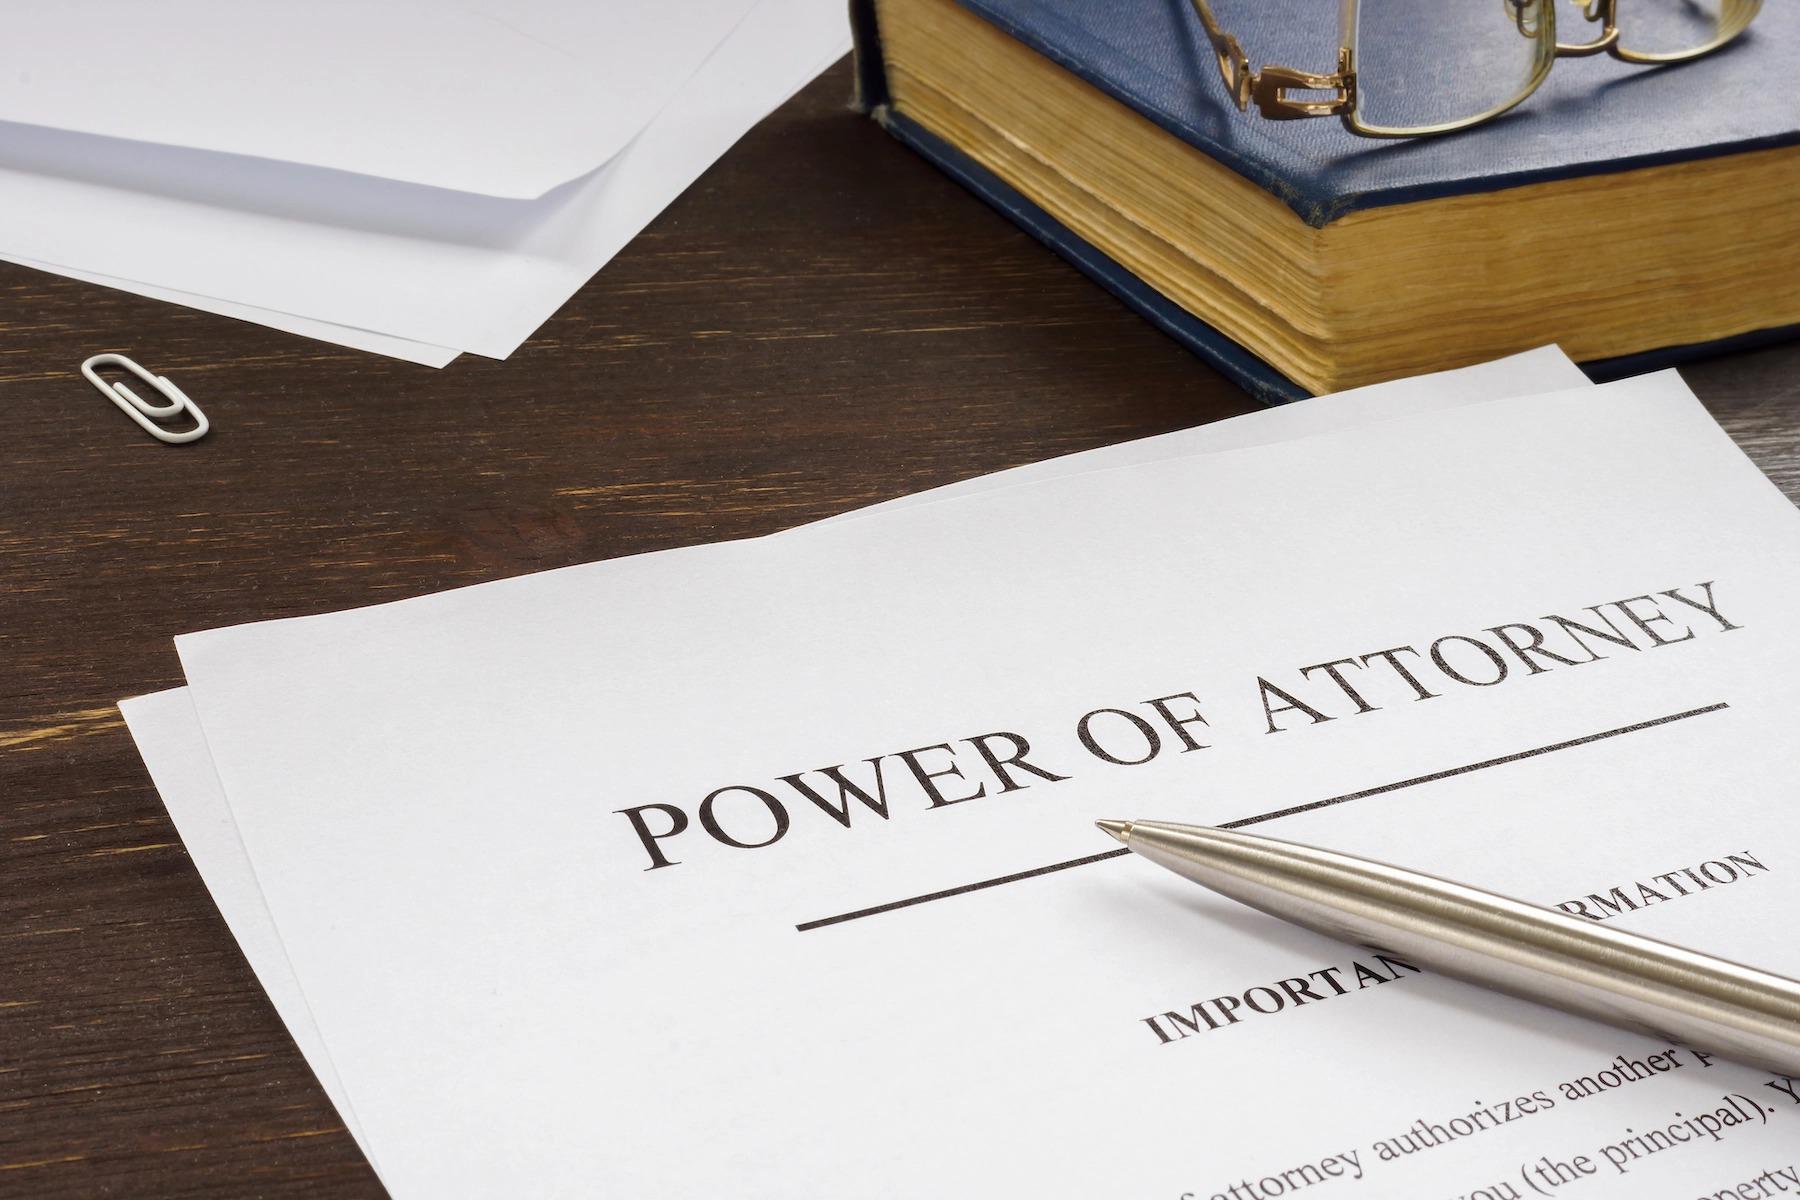 Power of Attorneys: Why We Need Them